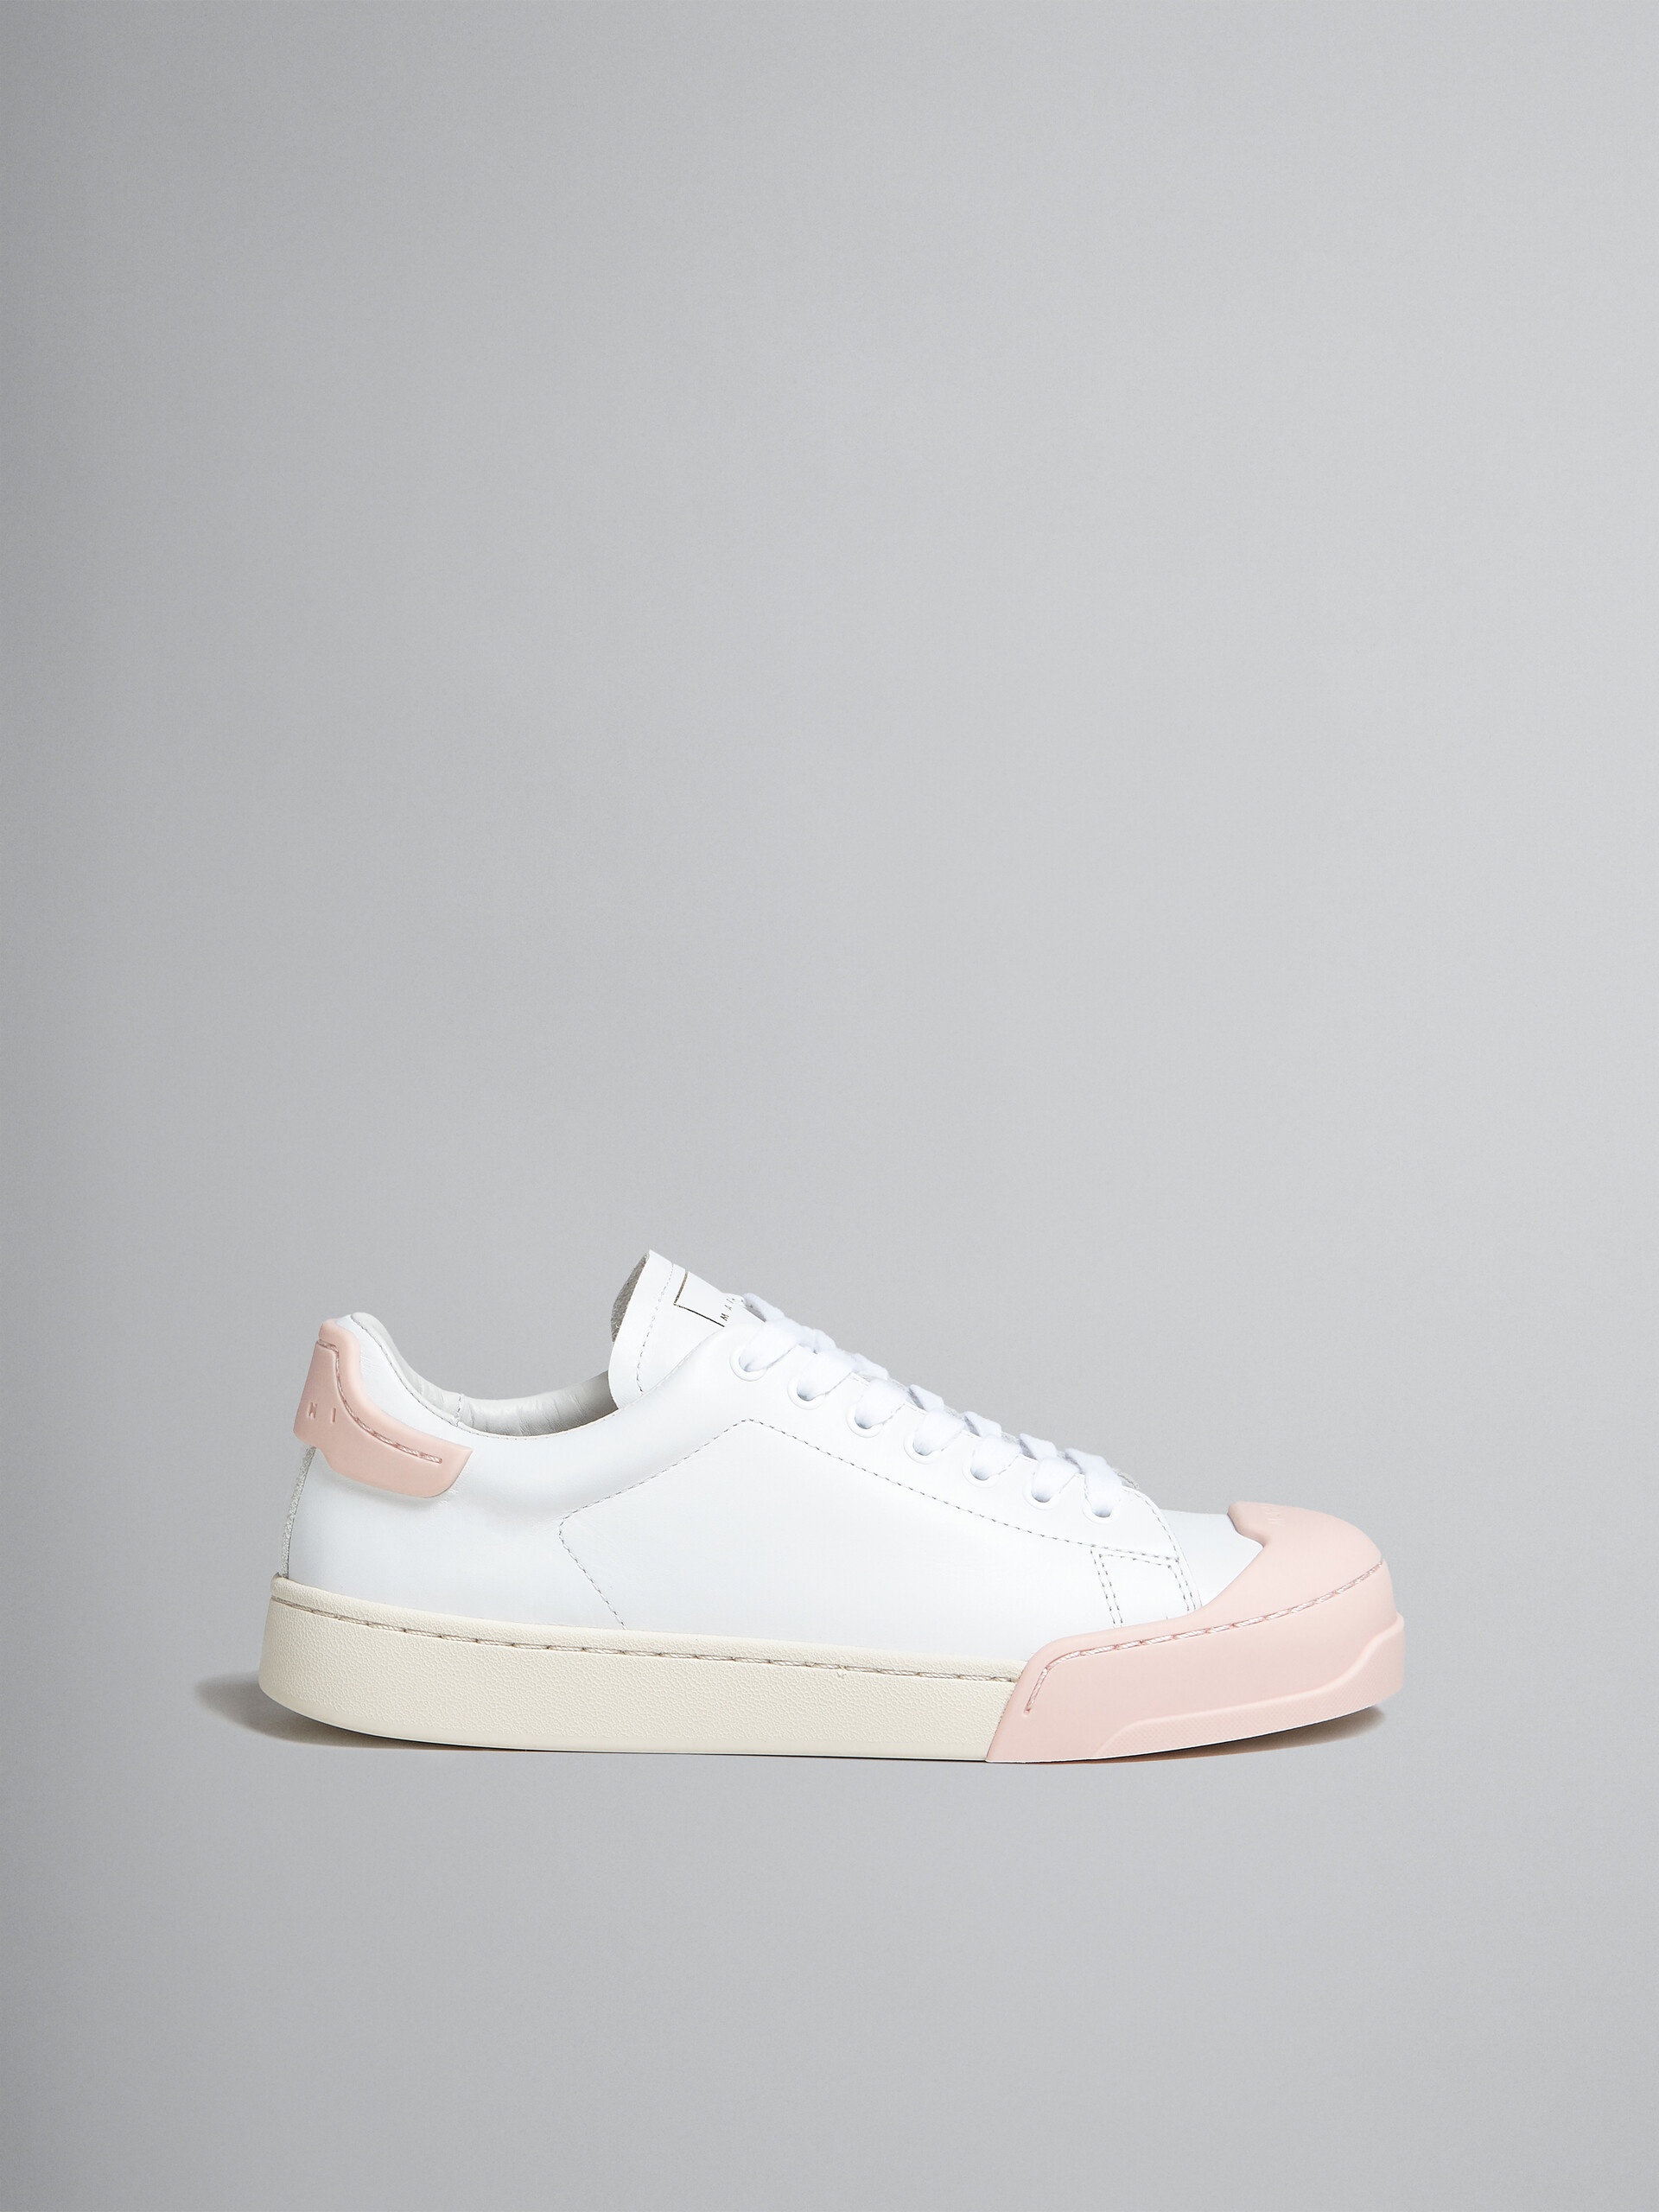 DADA BUMPER SNEAKER IN WHITE AND PINK LEATHER - 1